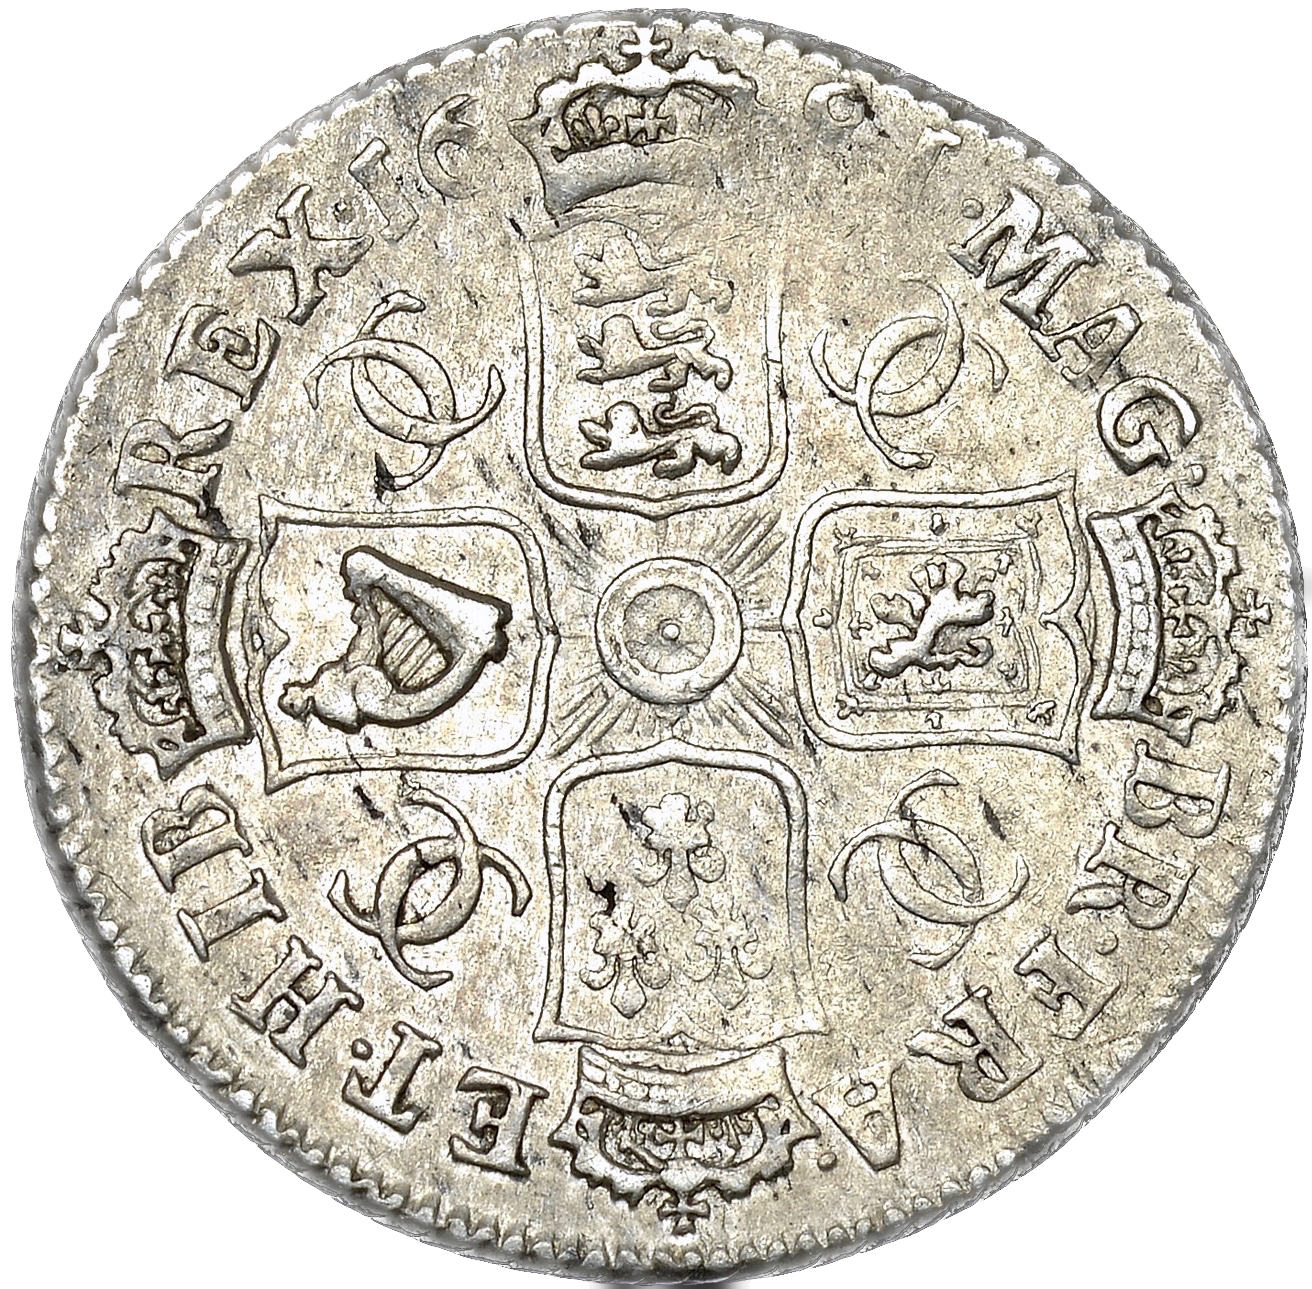 1681 Shilling Second bust S3375 ESC 553 Extremely rare (R3) VF